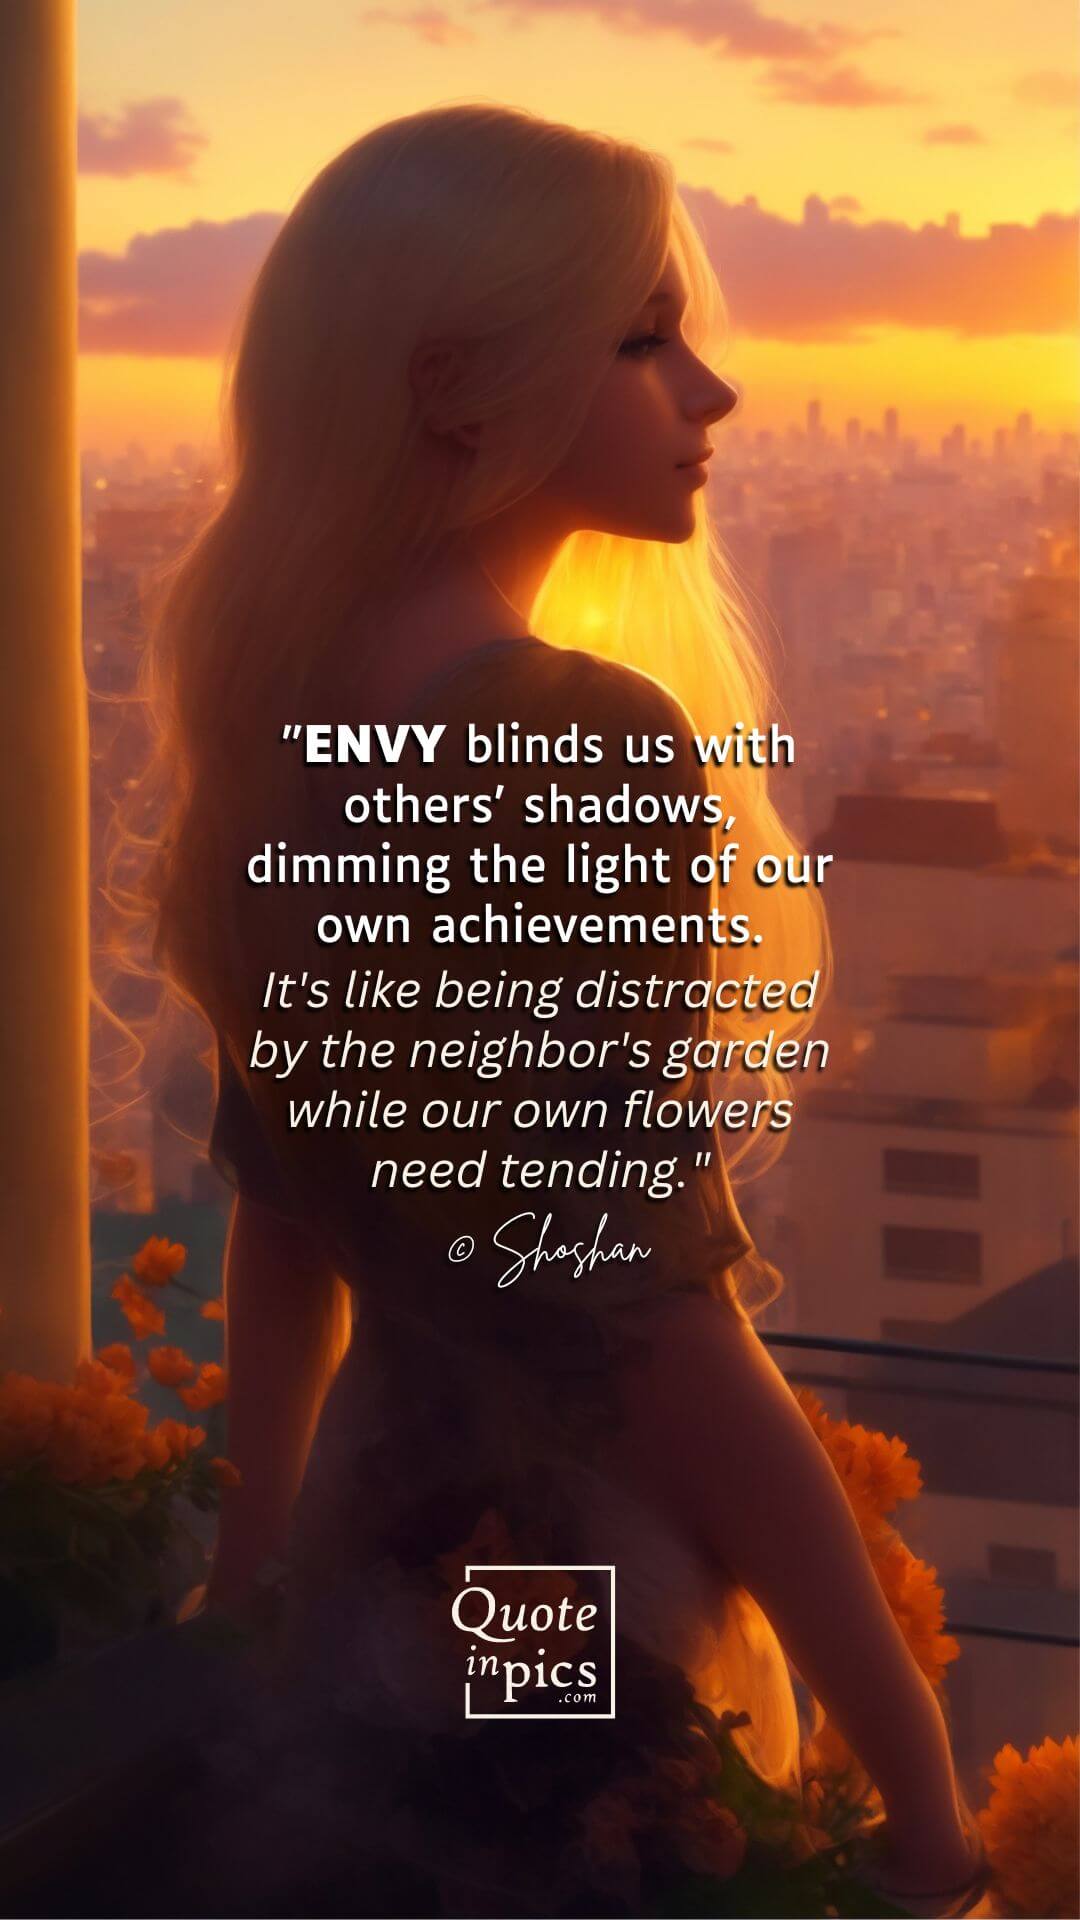 Envy blinds us with others' shadows, dimming the light of our own achievements.